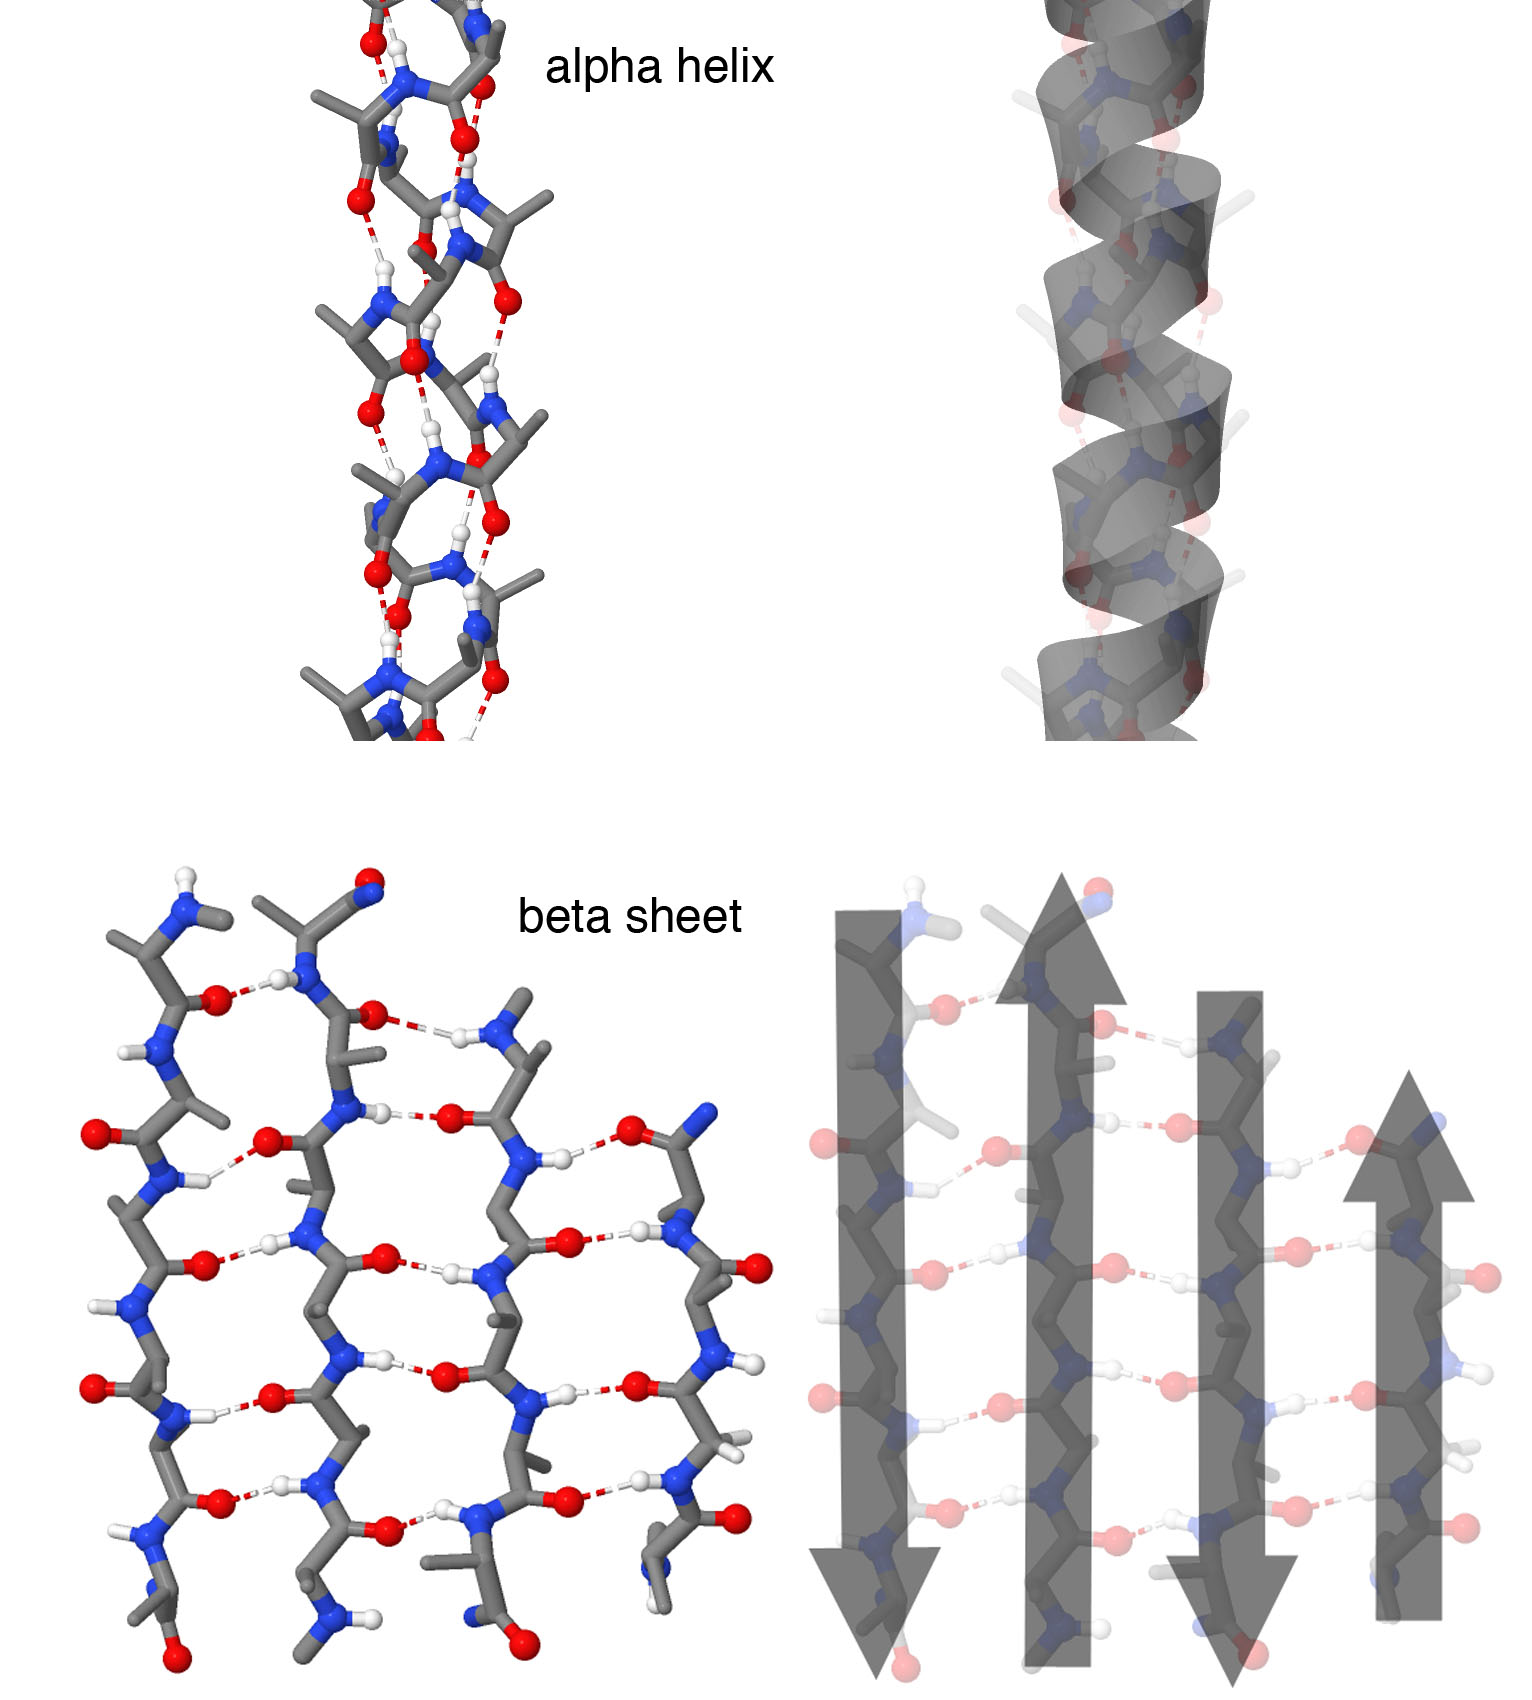 <I>Atomic representations are shown at left, and cartoon representations are shown at left. Alpha helices form spring-shaped structures with each amino acid forming a hydrogen bond with an amino acid further down the chain. Beta strands are extended regions of the chain that form hydrogen bonds with neighboring beta strands, forming a beta sheet. In this structure, four beta strands form the sheet with neighboring strands running in opposite directions, as shown by the cartoon arrows. Note that in these illustrations, side chains are not shown on each amino acid, to make it easier to see the backbone structure. Structures taken from PDB ID 1ic2 and 4gcr.</I>